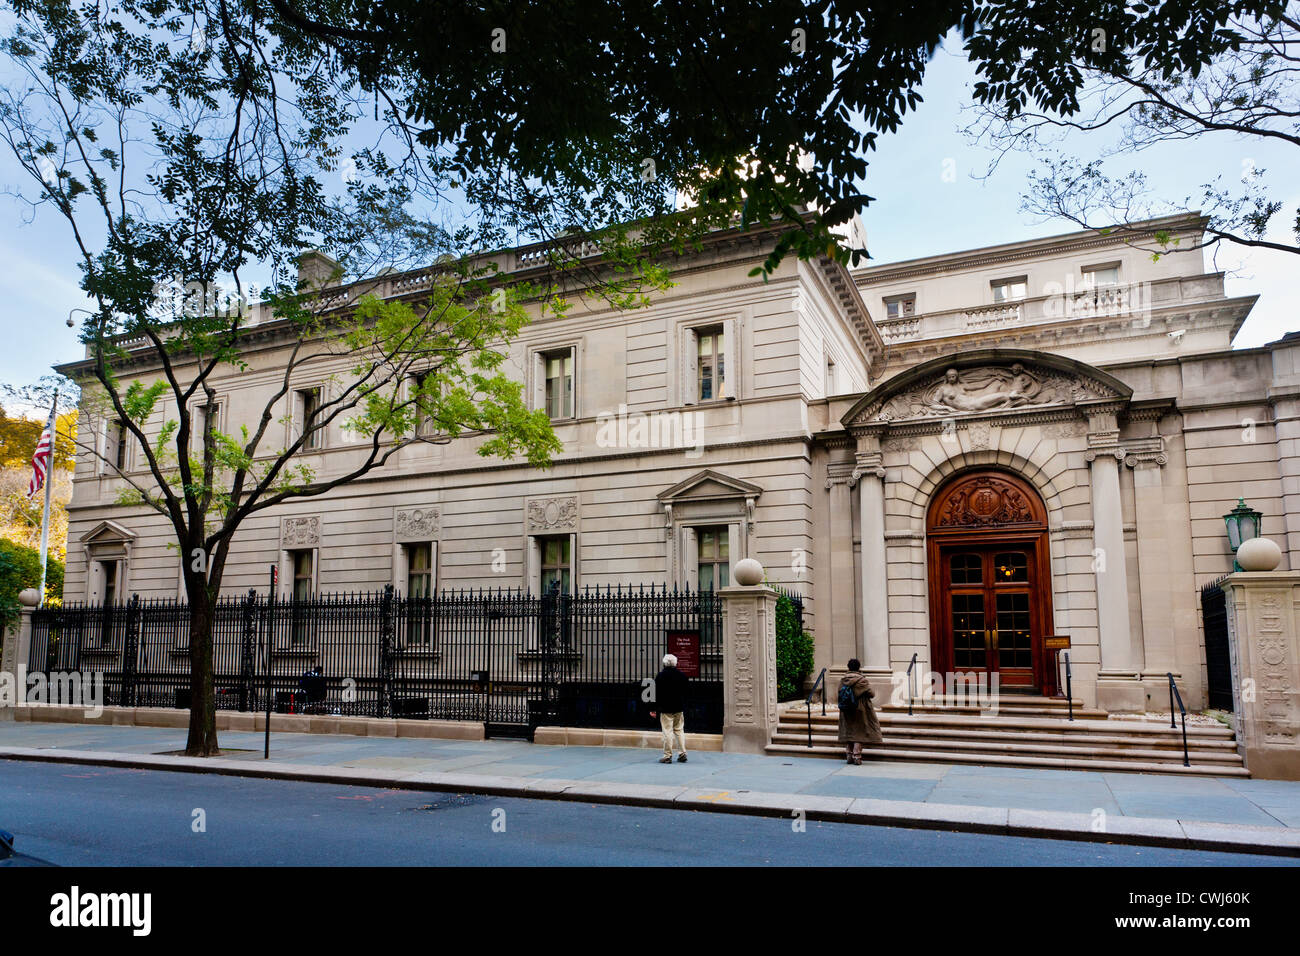 Die Frick Collection umfasst drei Vermeers. Fifth Avenue, Museumsmeile, New York City, USA. Stockfoto